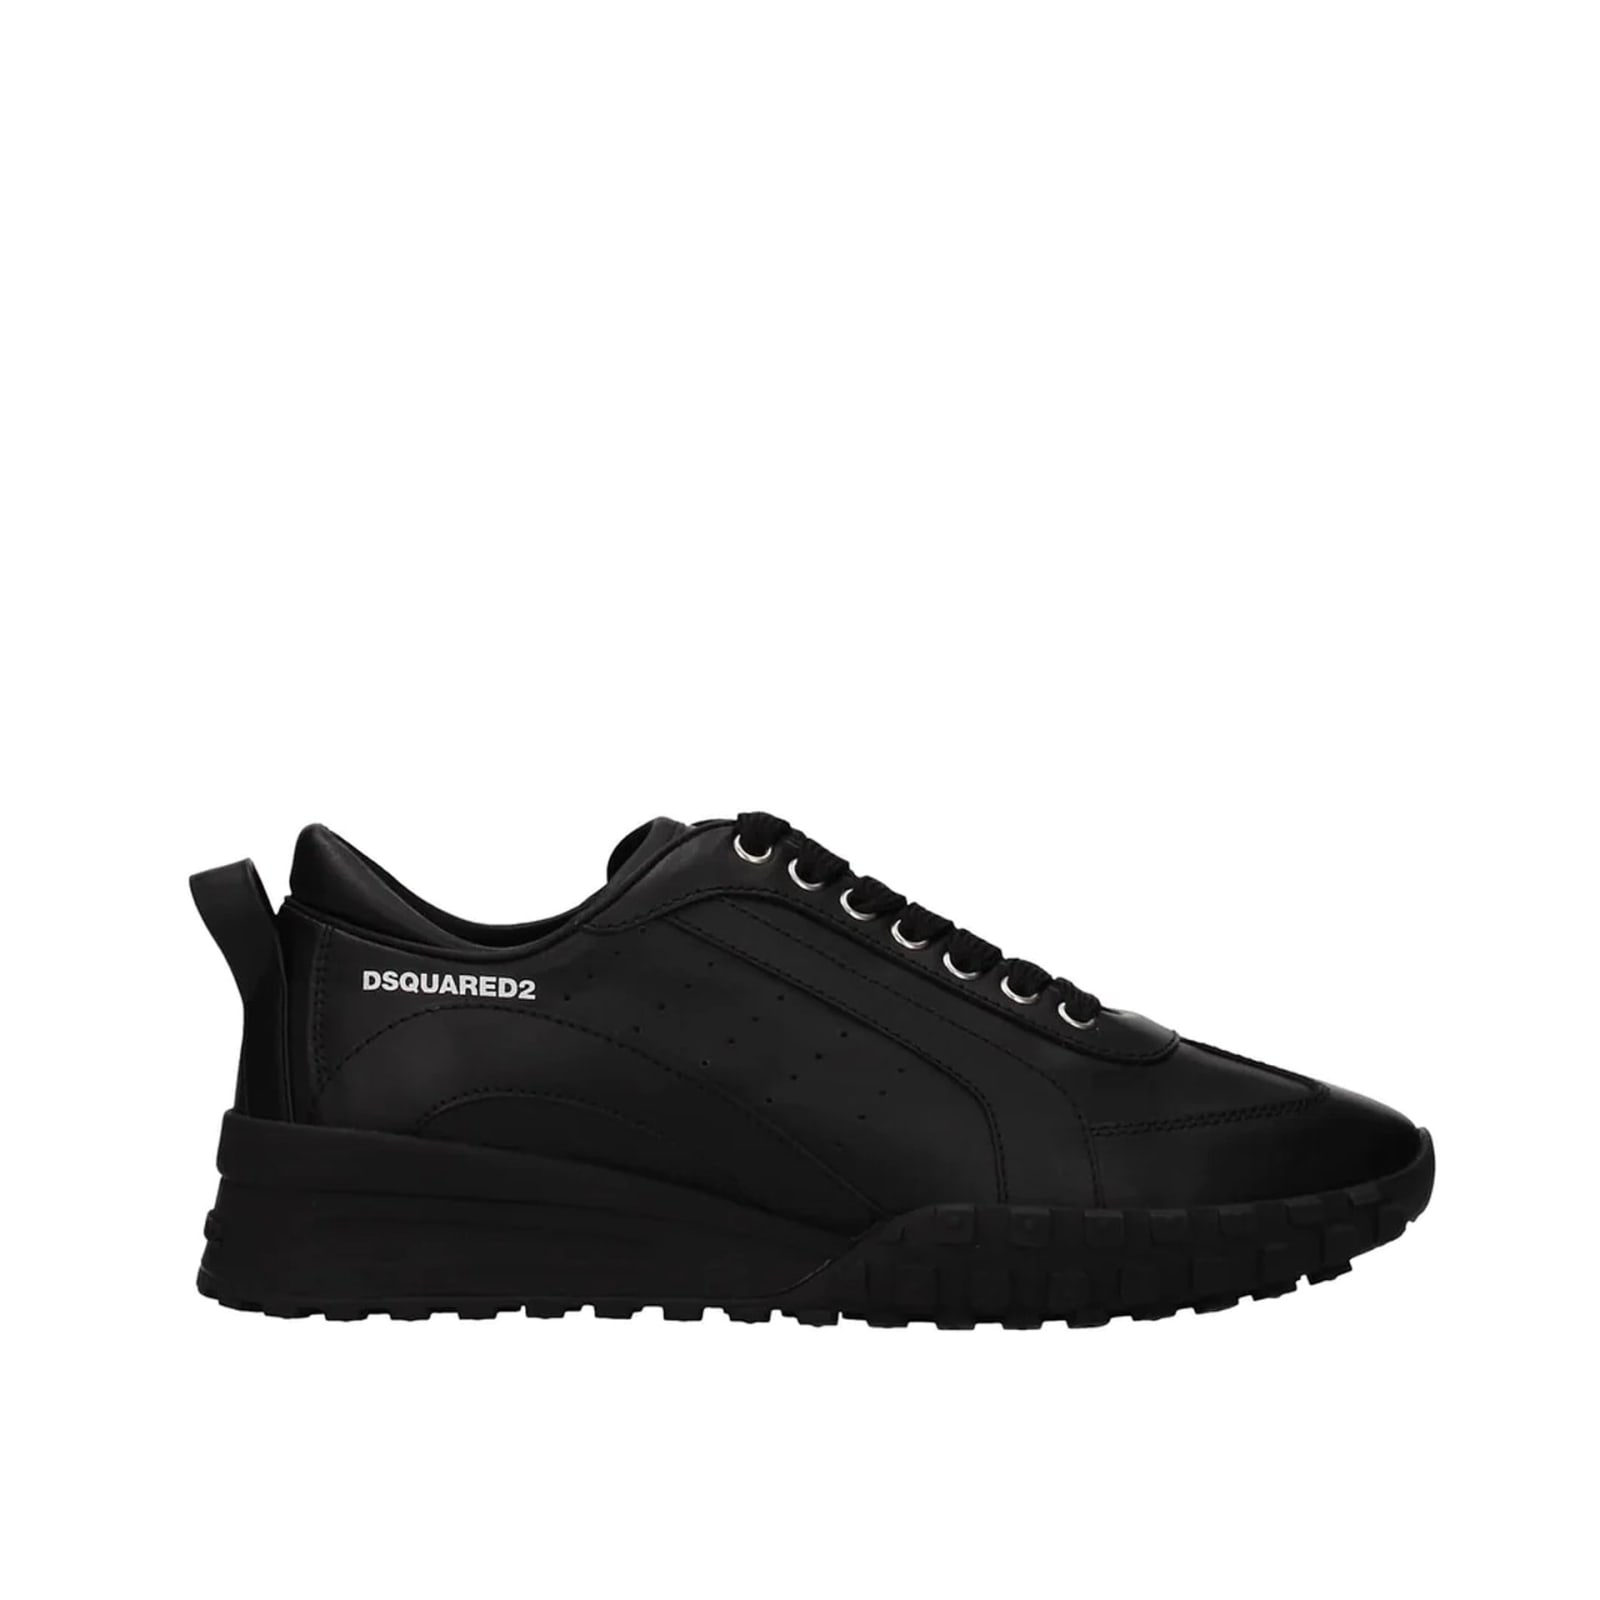 DSQUARED2 LEGEND LEATHER SNEAKERS